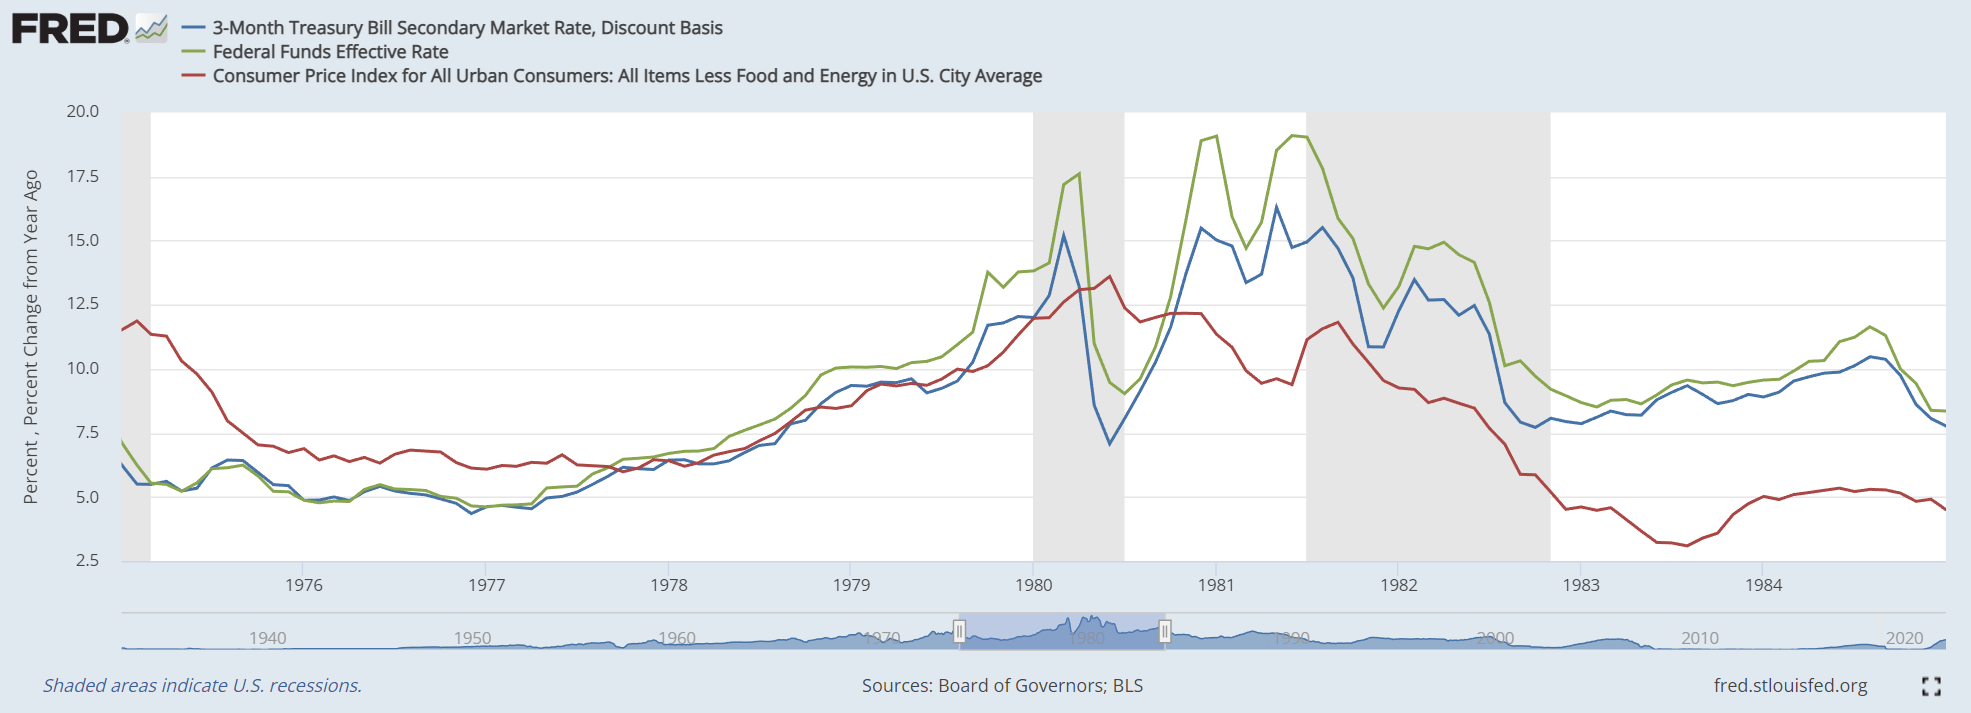 Fed rate cuts in 1980 caused resurgence of inflation in 1981. Could history repeat?